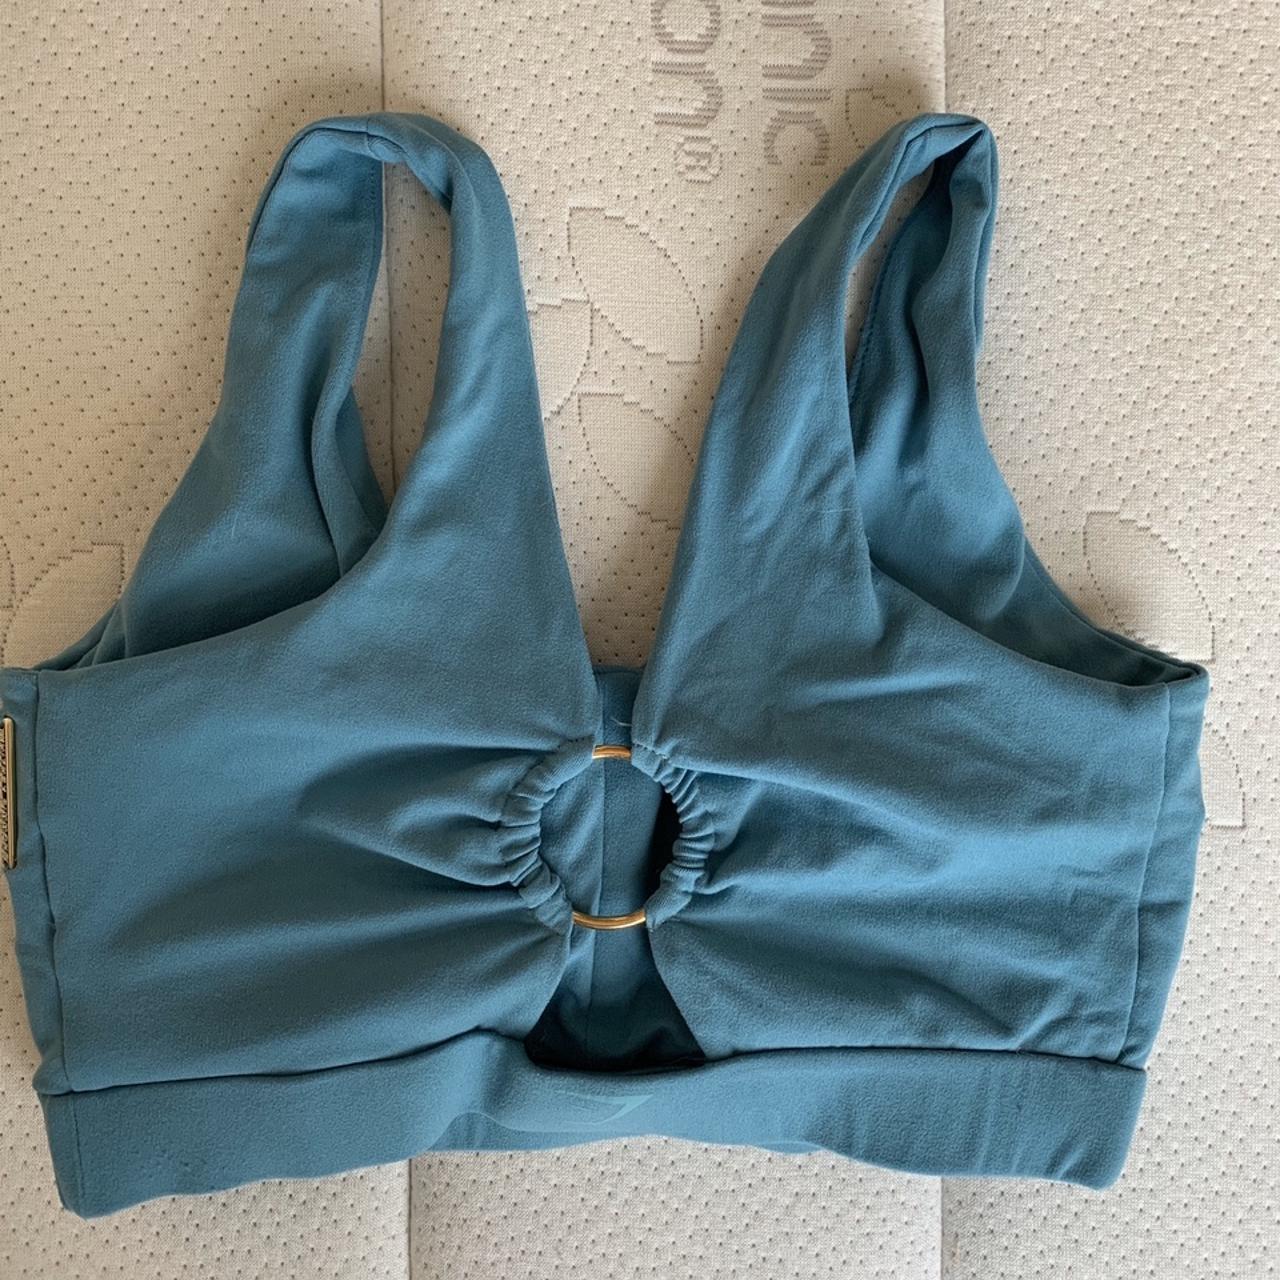 Whitney Simmons X Gymshark collab! Sports Bra in - Depop